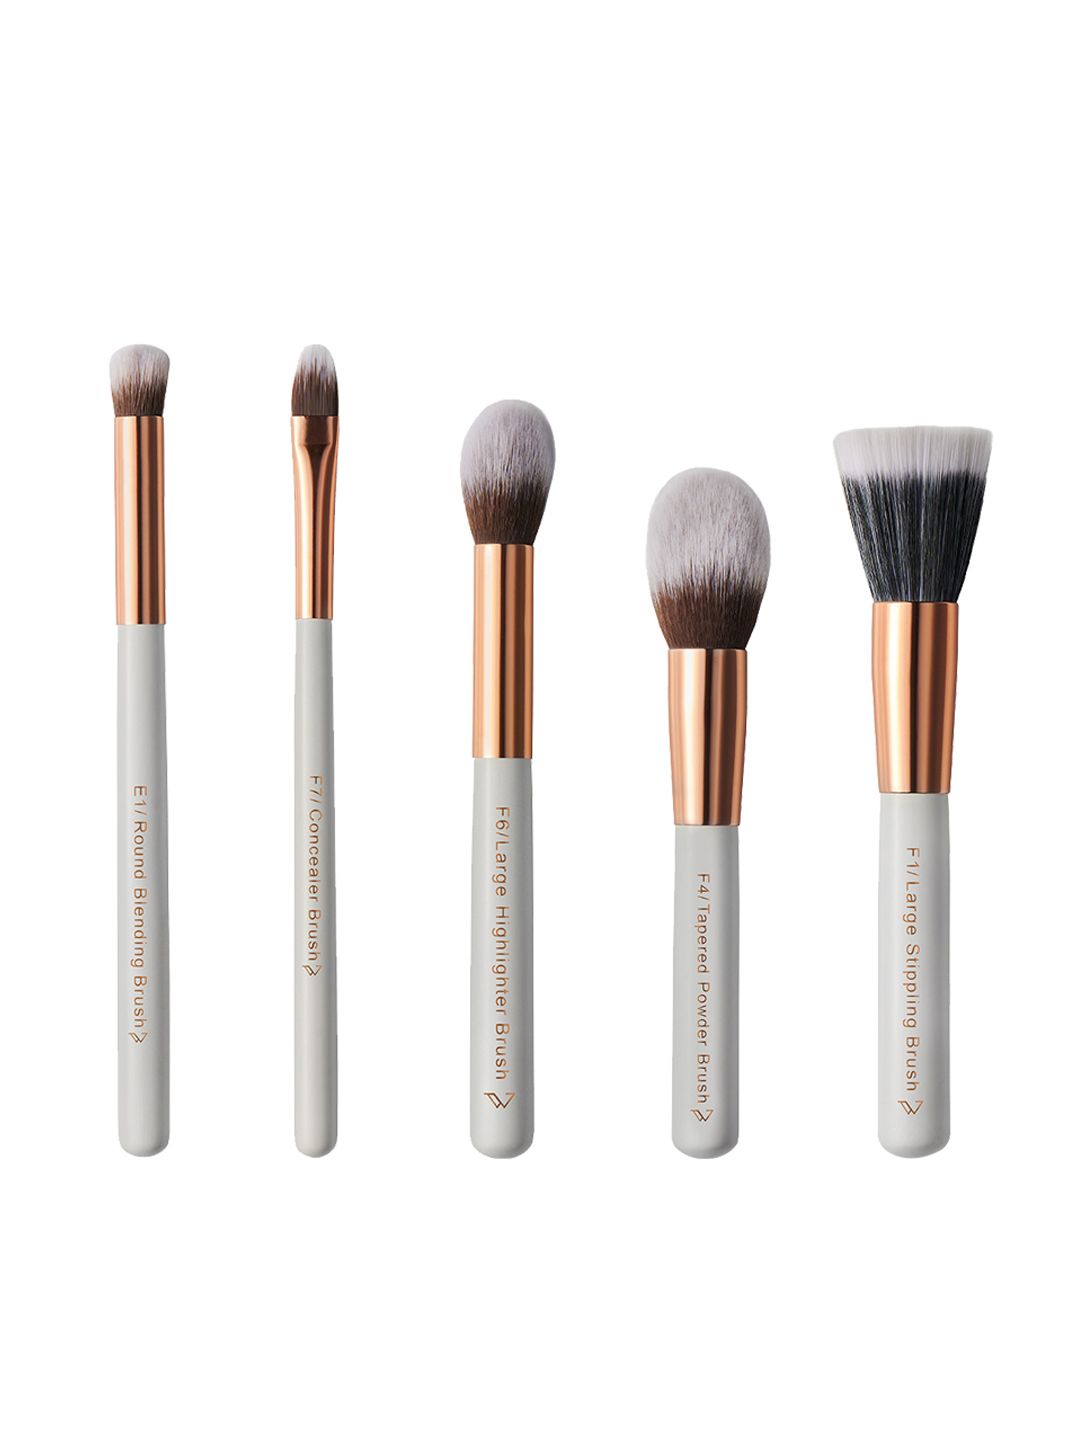 Pigment Play Set of 5 Flawless Base Face Makeup Brushes Price in India